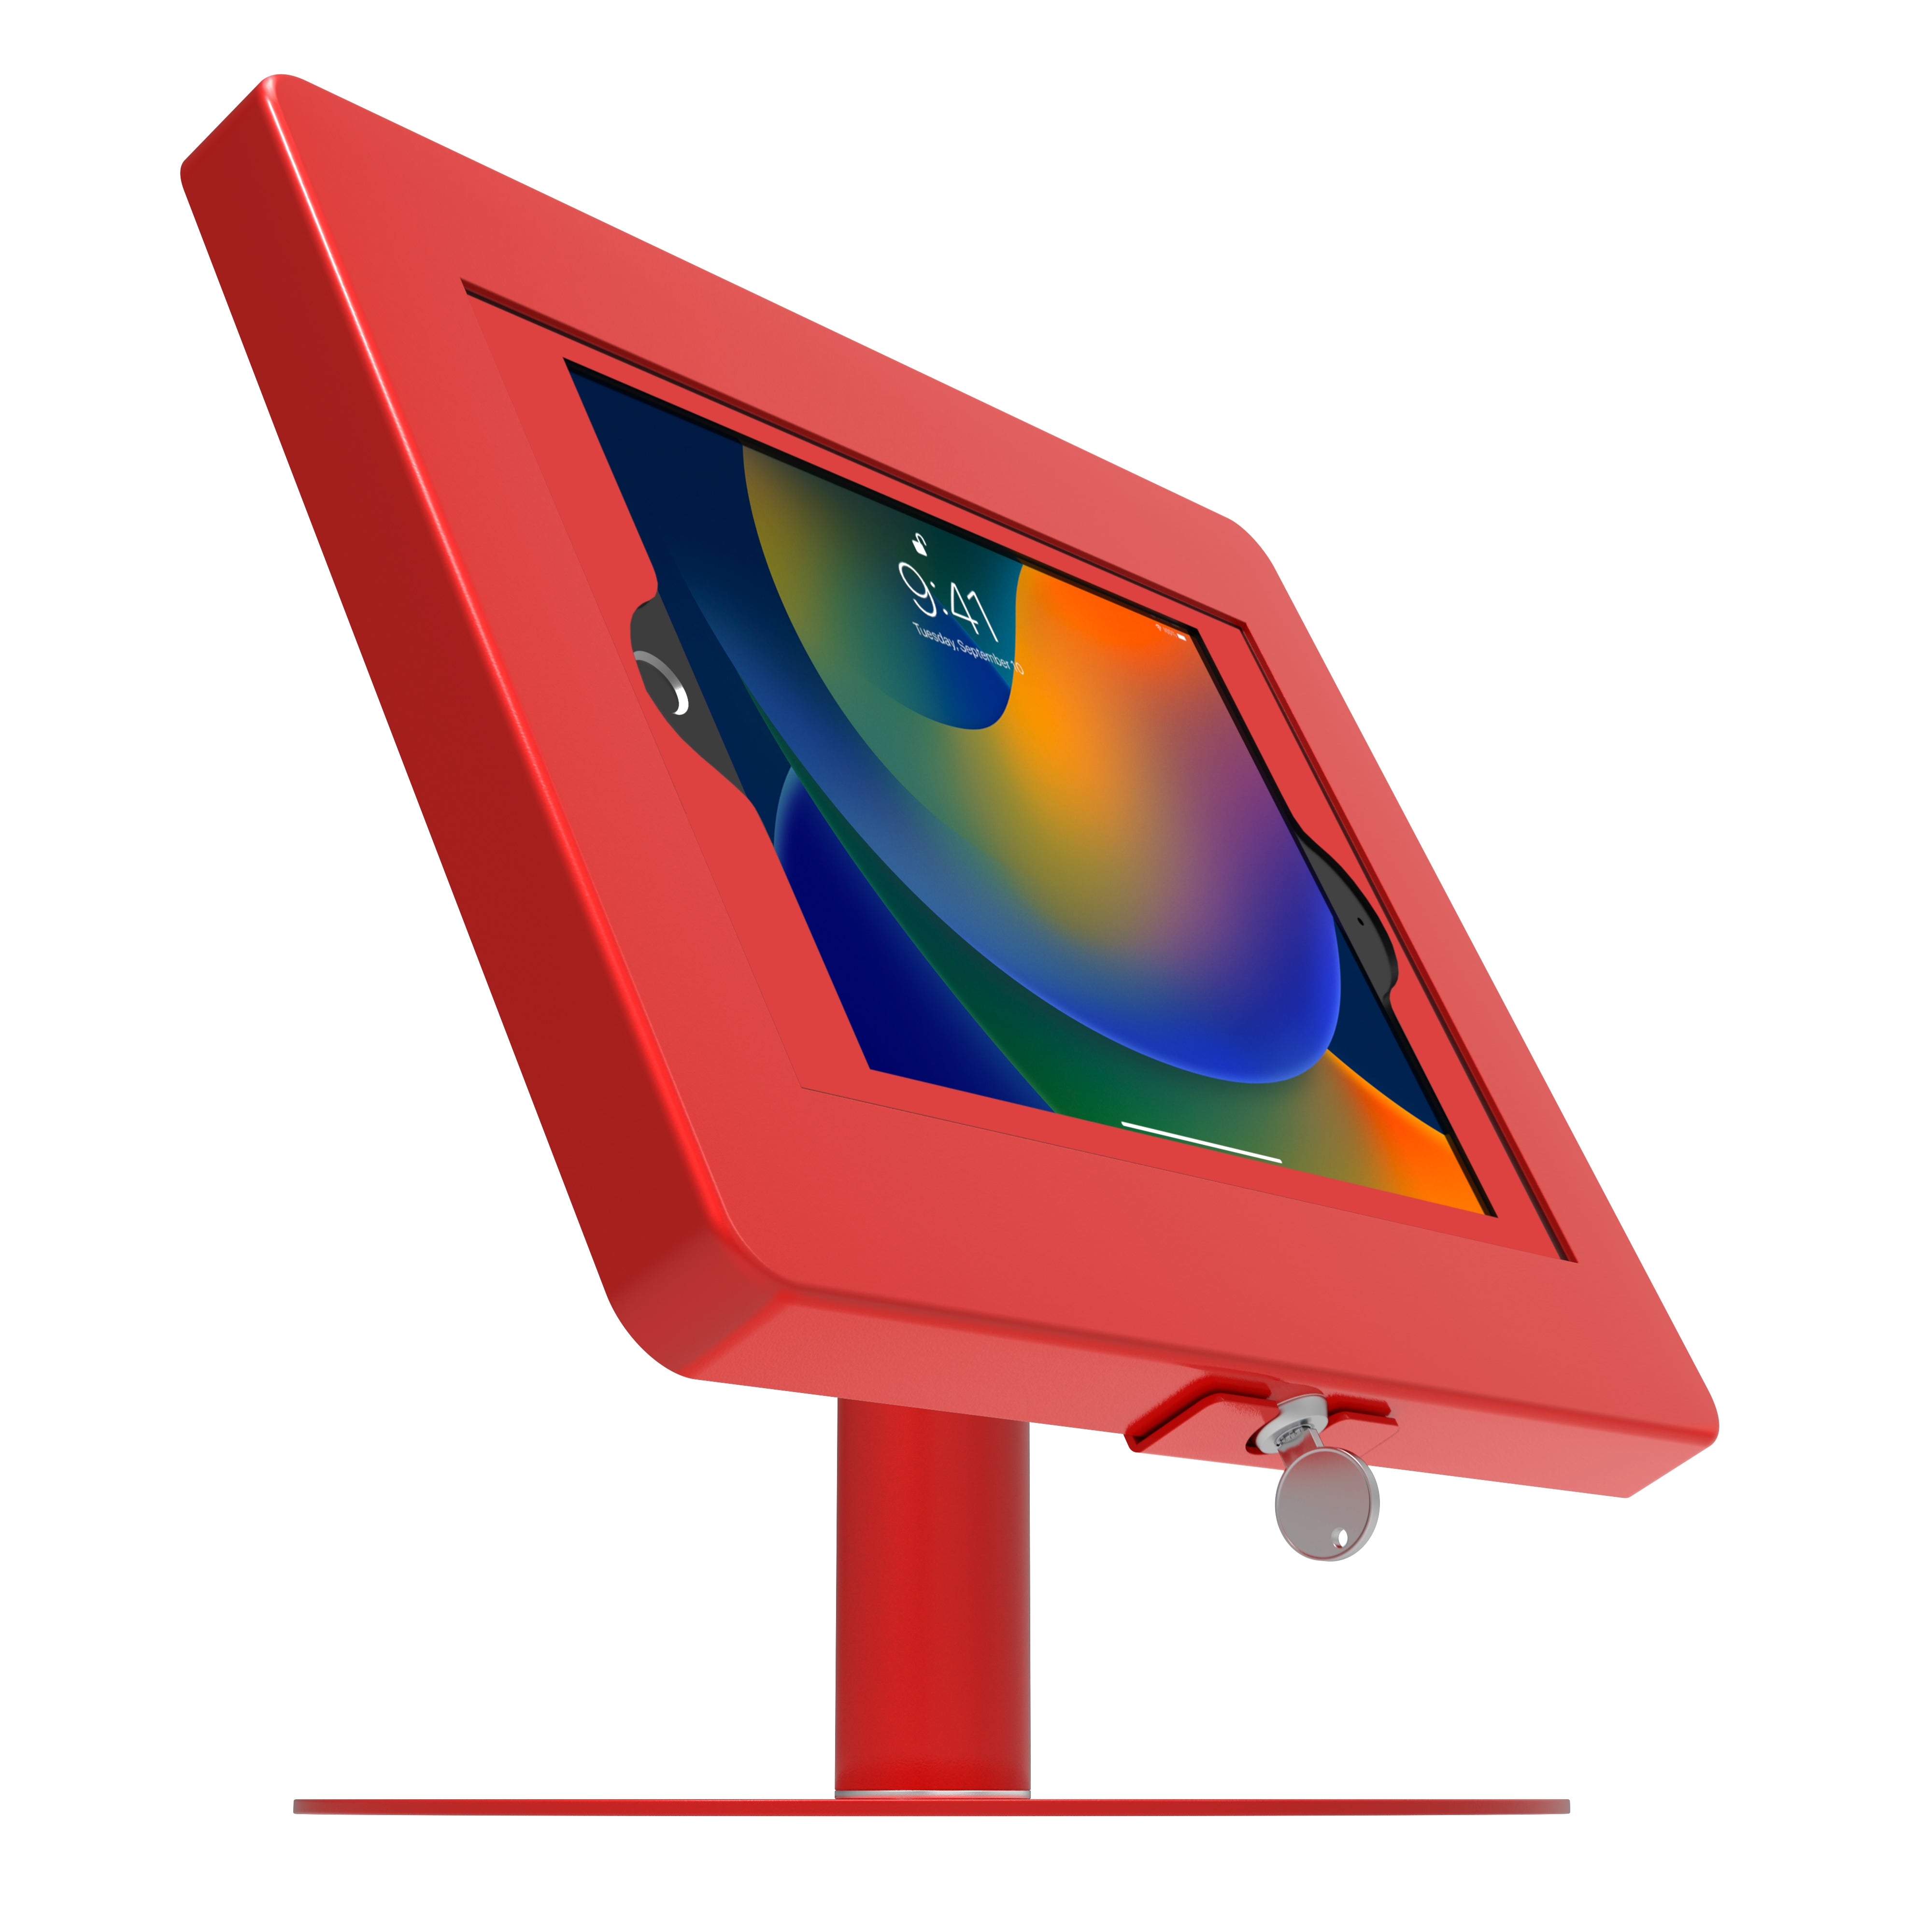 Hyperflex Security Kiosk Stand for Tablets, including iPad 10.2-inch (7th/ 8th/ 9th Gen.)